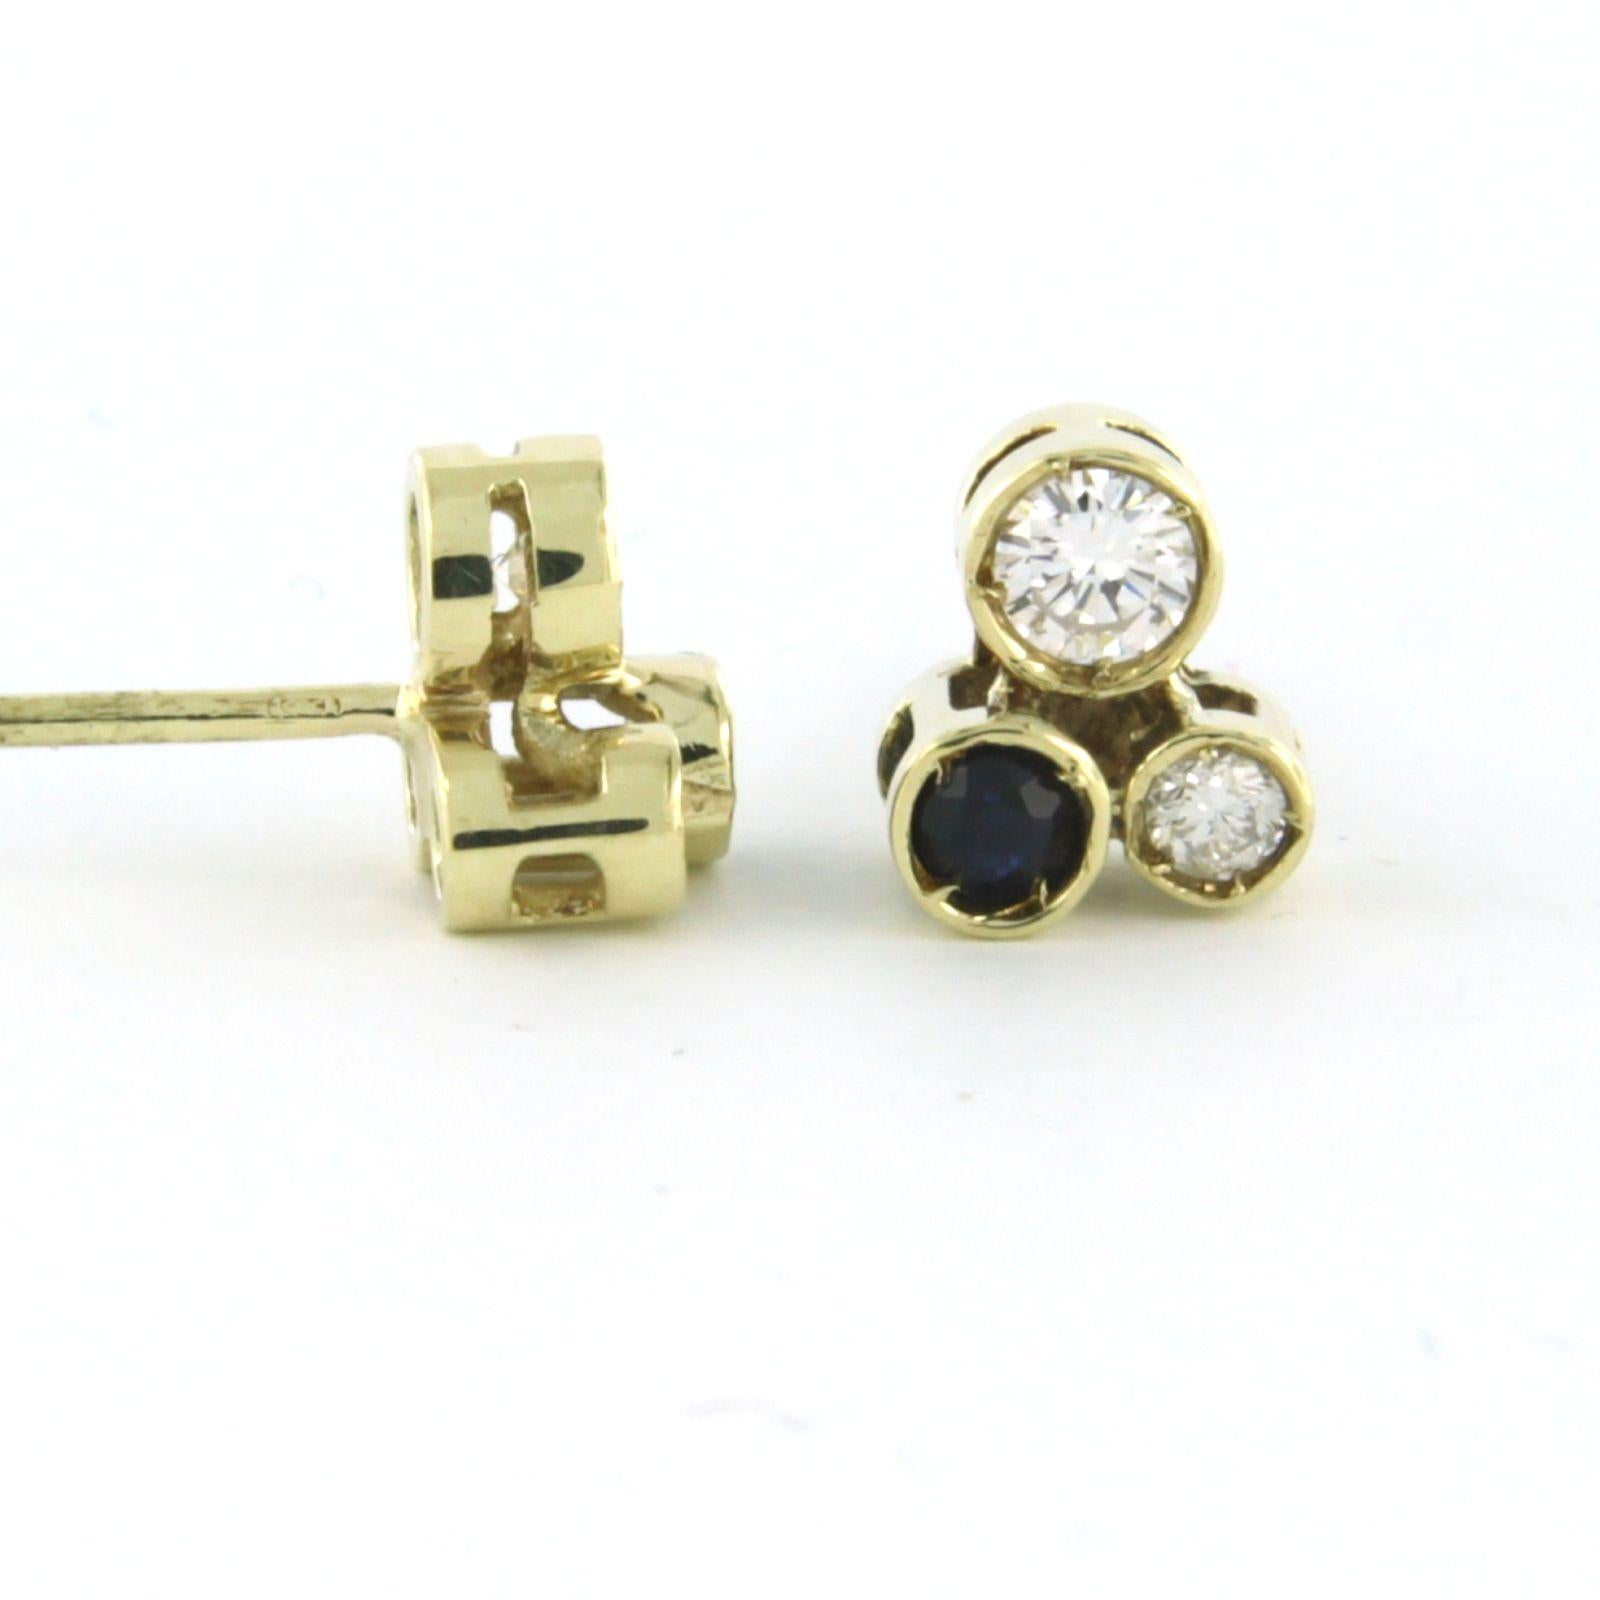 Brilliant Cut Earrings stud set with sapphire and diamonds 14k yellow gold